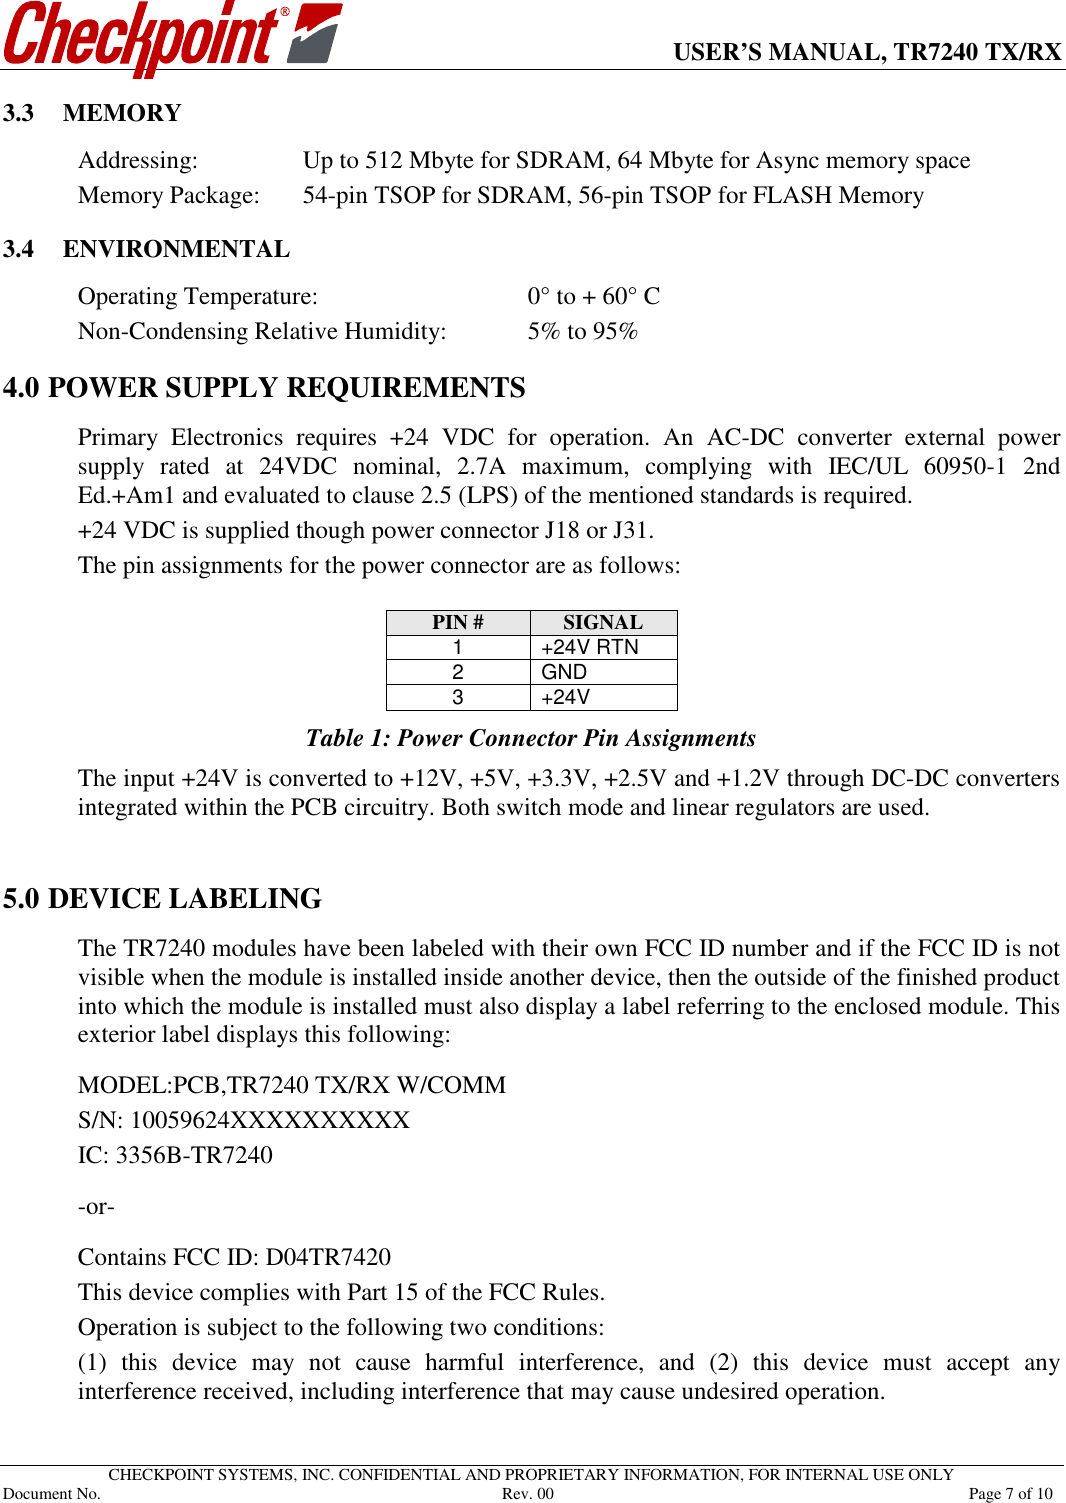      USER’S MANUAL, TR7240 TX/RX   CHECKPOINT SYSTEMS, INC. CONFIDENTIAL AND PROPRIETARY INFORMATION, FOR INTERNAL USE ONLY Document No.     Rev. 00  Page 7 of 10 3.3 MEMORY Addressing:    Up to 512 Mbyte for SDRAM, 64 Mbyte for Async memory space Memory Package:  54-pin TSOP for SDRAM, 56-pin TSOP for FLASH Memory 3.4 ENVIRONMENTAL Operating Temperature:      0° to + 60° C Non-Condensing Relative Humidity:   5% to 95% 4.0 POWER SUPPLY REQUIREMENTS Primary  Electronics  requires  +24  VDC  for  operation.  An  AC-DC  converter  external  power supply  rated  at  24VDC  nominal,  2.7A  maximum,  complying  with  IEC/UL  60950-1  2nd Ed.+Am1 and evaluated to clause 2.5 (LPS) of the mentioned standards is required.  +24 VDC is supplied though power connector J18 or J31.  The pin assignments for the power connector are as follows:  PIN #  SIGNAL 1  +24V RTN 2  GND 3  +24V Table 1: Power Connector Pin Assignments The input +24V is converted to +12V, +5V, +3.3V, +2.5V and +1.2V through DC-DC converters integrated within the PCB circuitry. Both switch mode and linear regulators are used.   5.0 DEVICE LABELING The TR7240 modules have been labeled with their own FCC ID number and if the FCC ID is not visible when the module is installed inside another device, then the outside of the finished product into which the module is installed must also display a label referring to the enclosed module. This exterior label displays this following:  MODEL:PCB,TR7240 TX/RX W/COMM S/N: 10059624XXXXXXXXXX IC: 3356B-TR7240   -or-   Contains FCC ID: D04TR7420 This device complies with Part 15 of the FCC Rules.  Operation is subject to the following two conditions: (1)  this  device  may  not  cause  harmful  interference,  and  (2)  this  device  must  accept  any interference received, including interference that may cause undesired operation.   